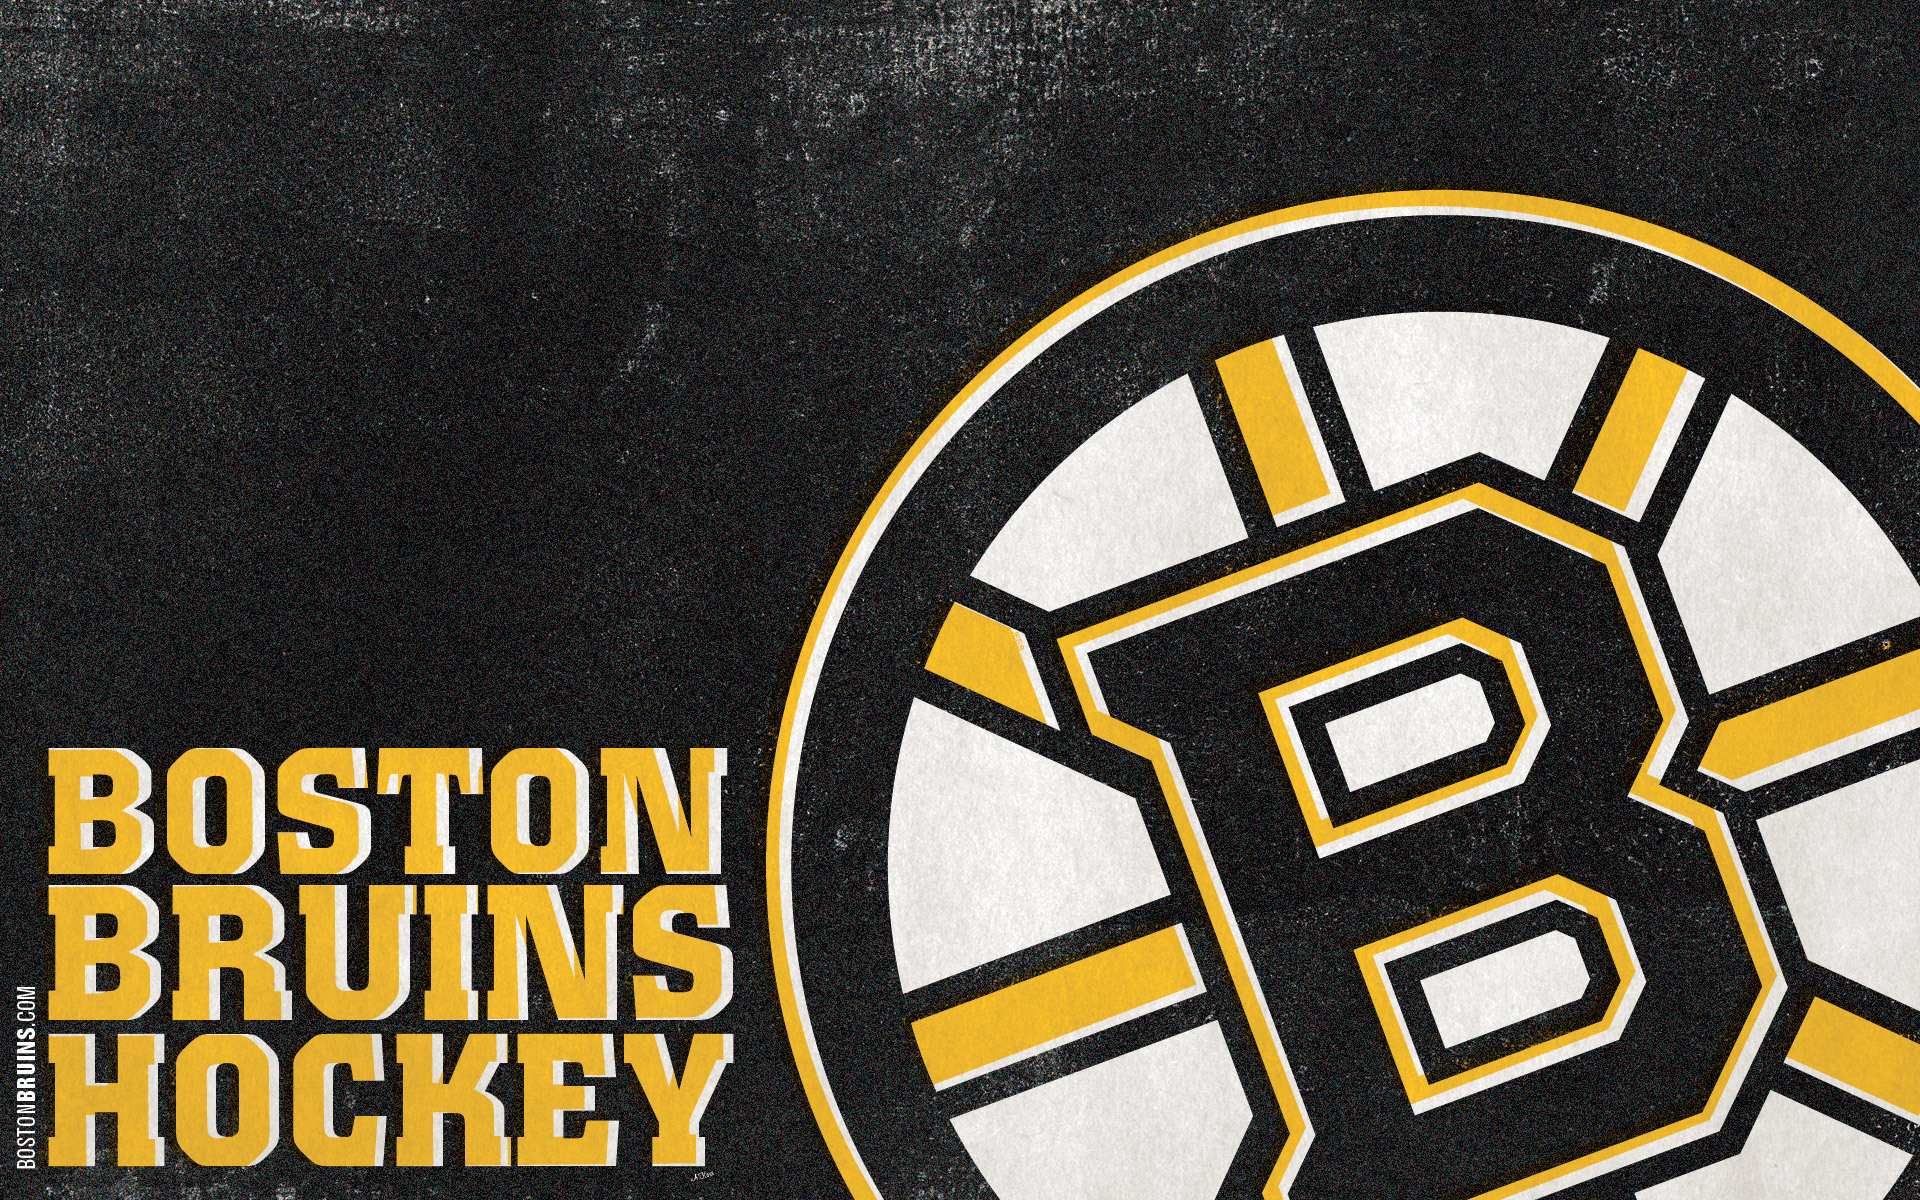 Boston Bruins Image Logo HD Wallpaper And Background